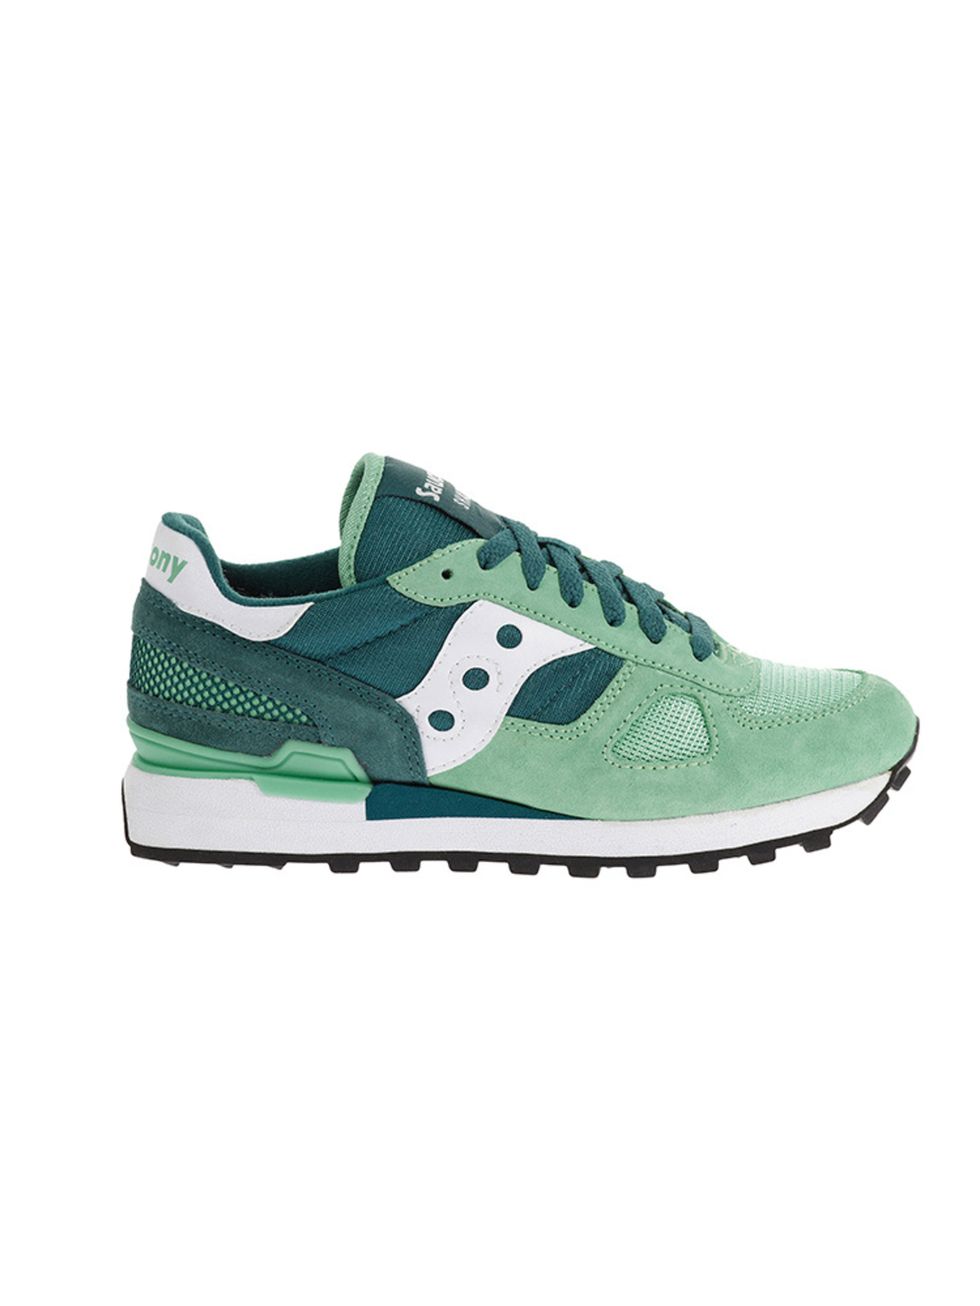 <p>Fashion Cupboard Intern Jazz Harris is adding these mint colour trainers to her collection. </p>

<p><a href="http://www.saucony.co.uk/en_GB/shadow-original/11951W.html?dwvar_11951W_color=S1108-602#cgid=womens-originals-view-all&start=1" target="_blank